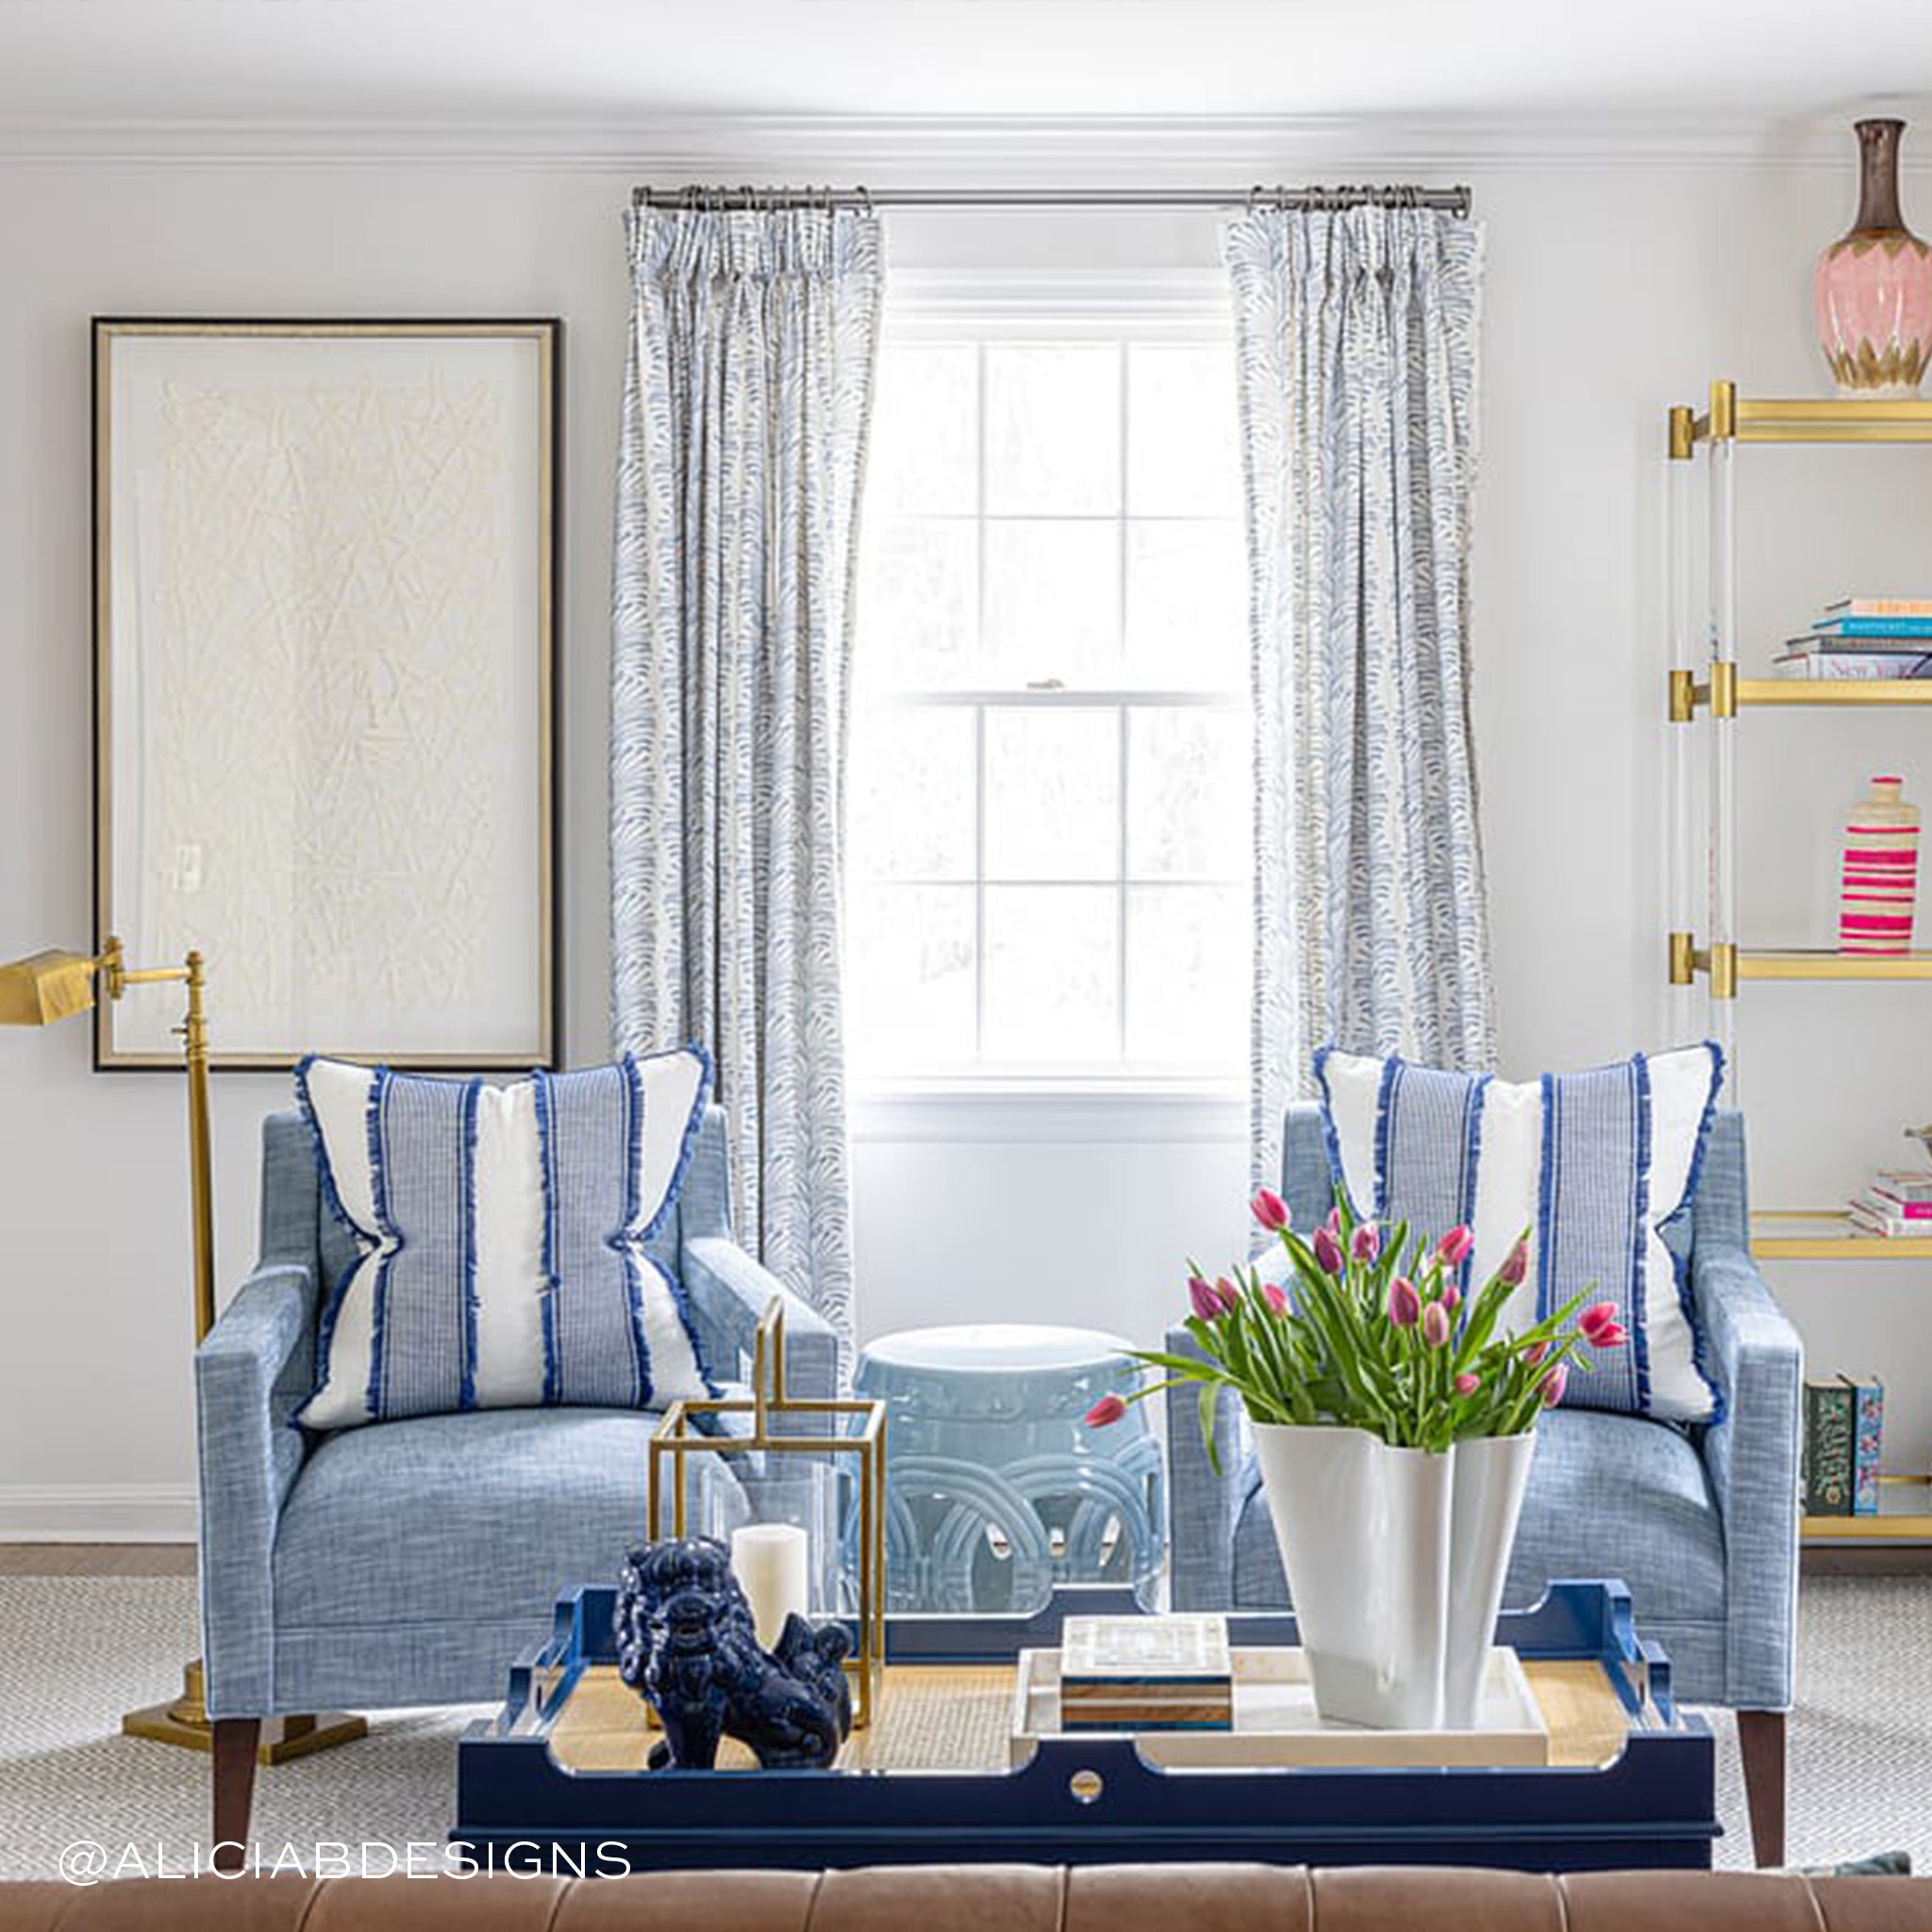 Living room styled with Sky Blue Palm Printed Curtains and two blue sofa chairs with striped blue and white pillows next to pink flowers in white vase on blue coffee table. Photo taken by Alicia B Designs